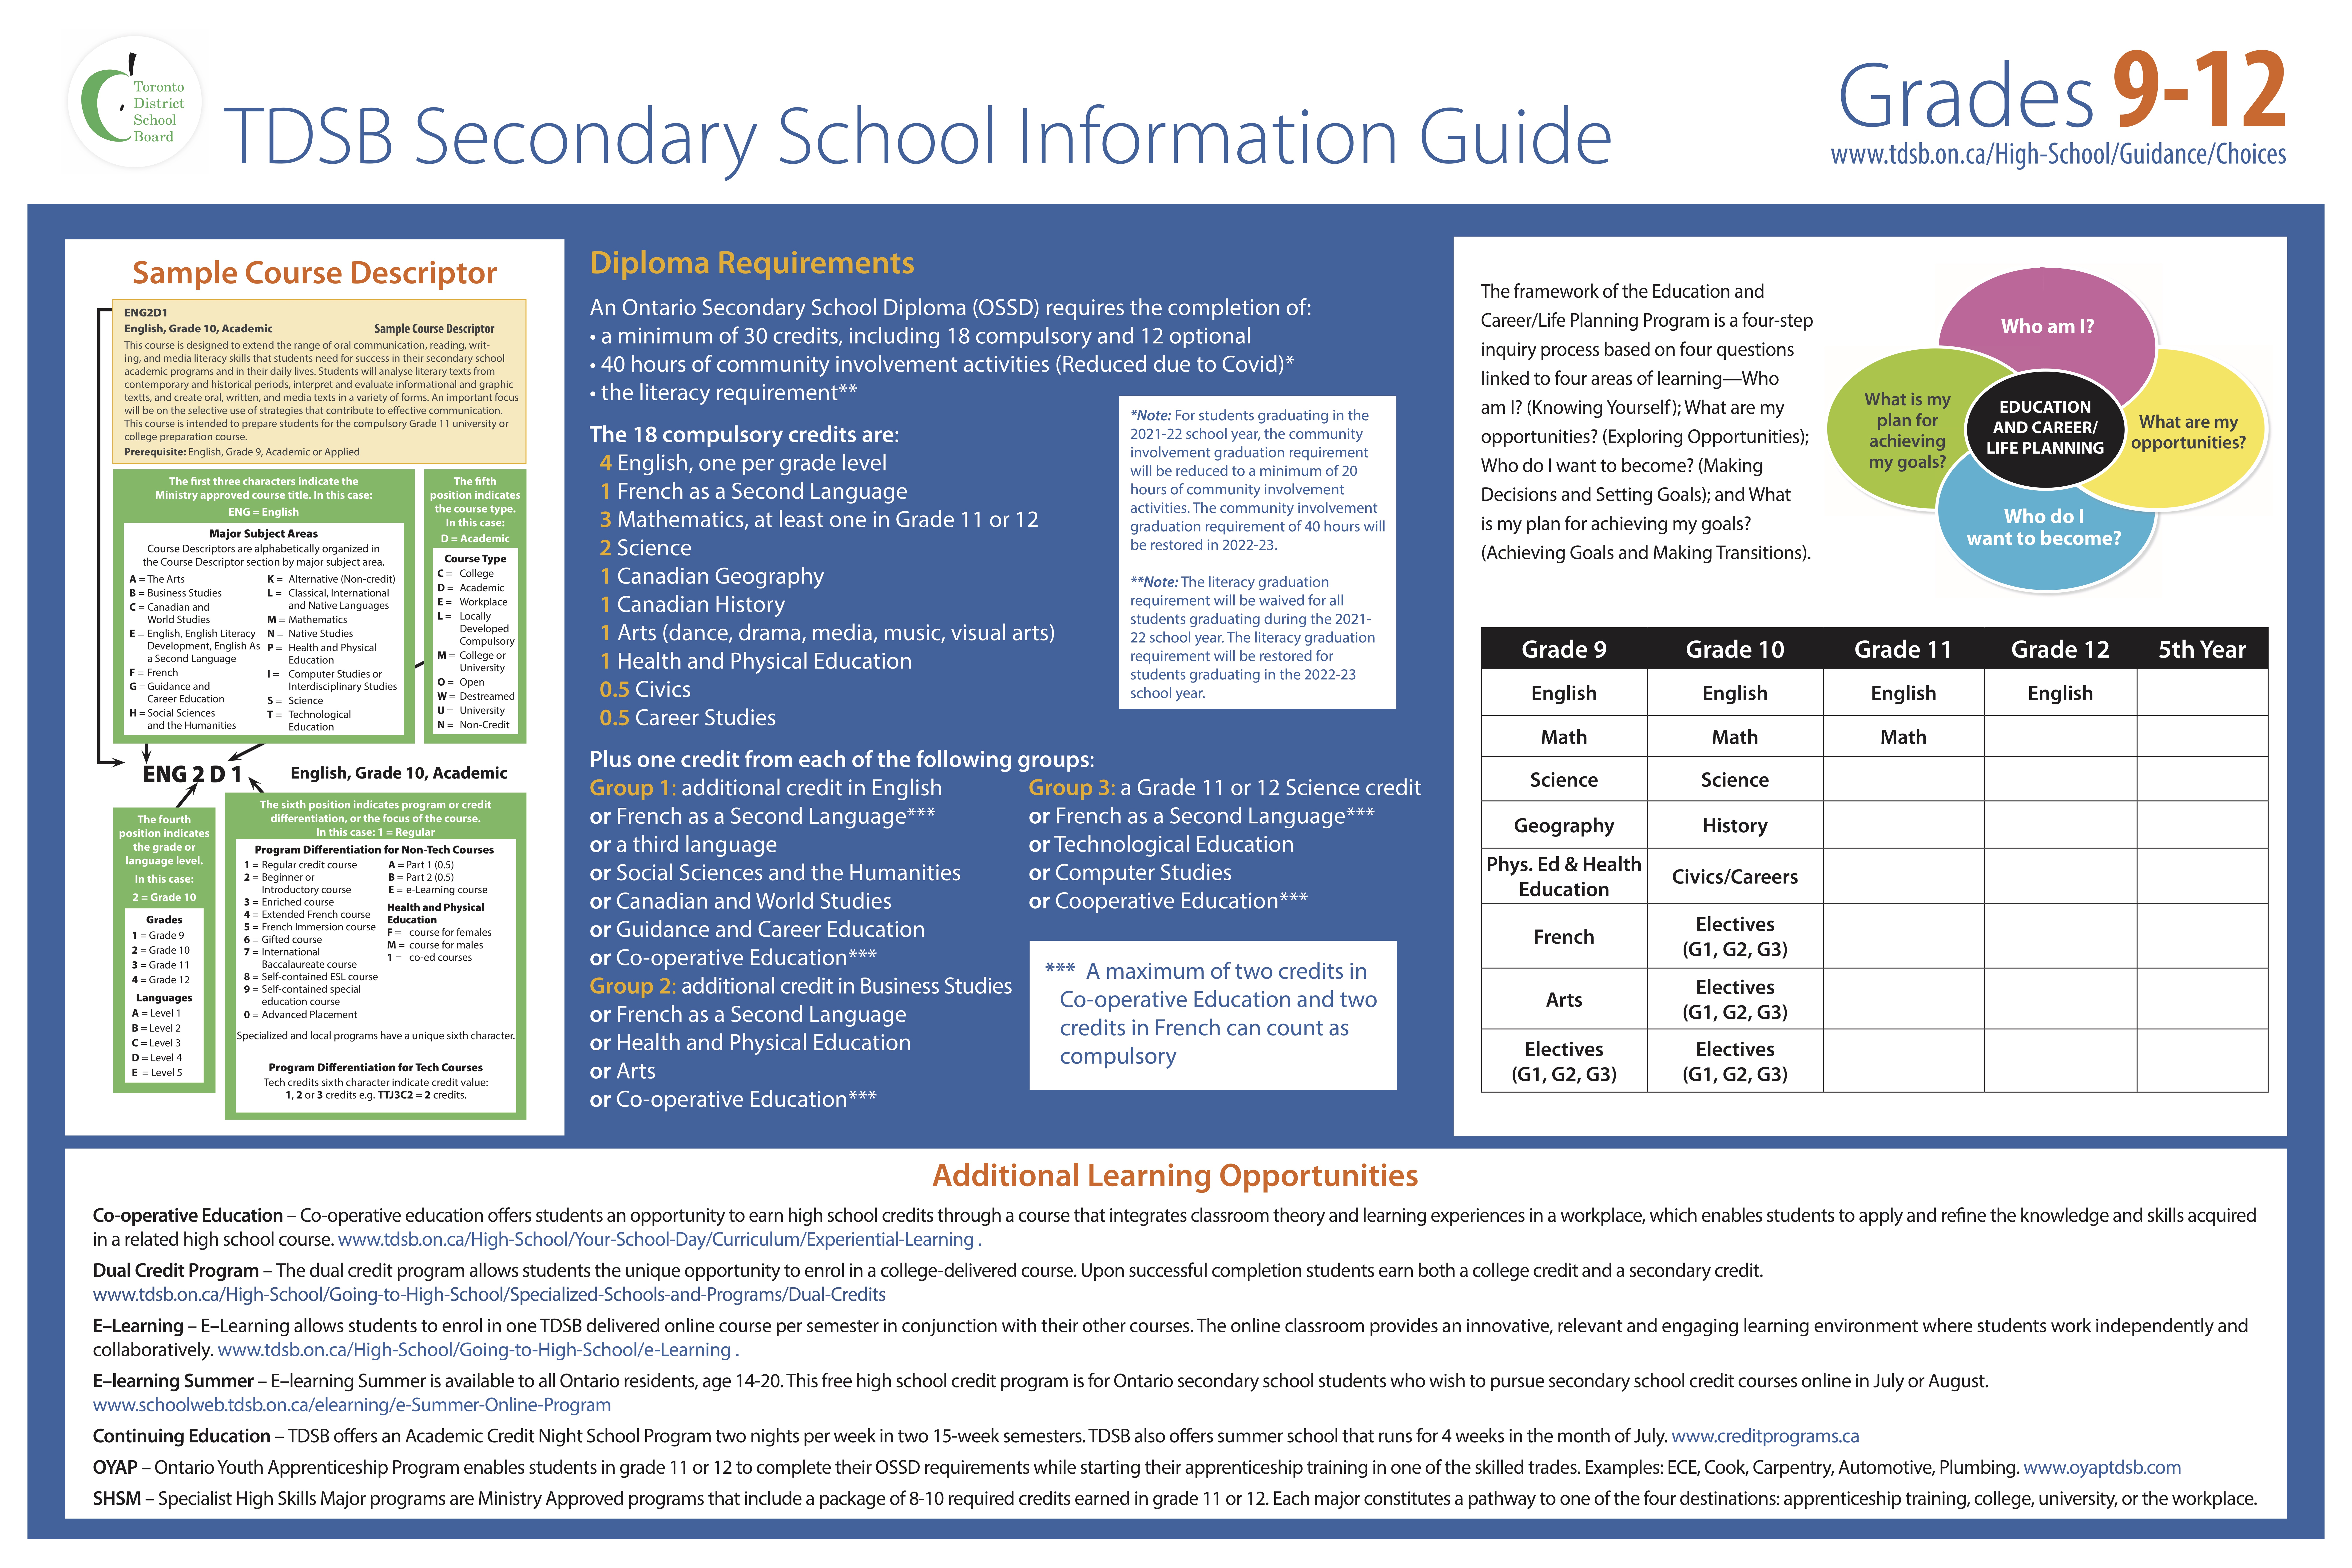 Secondary_School_Information_Guide_2021-2022